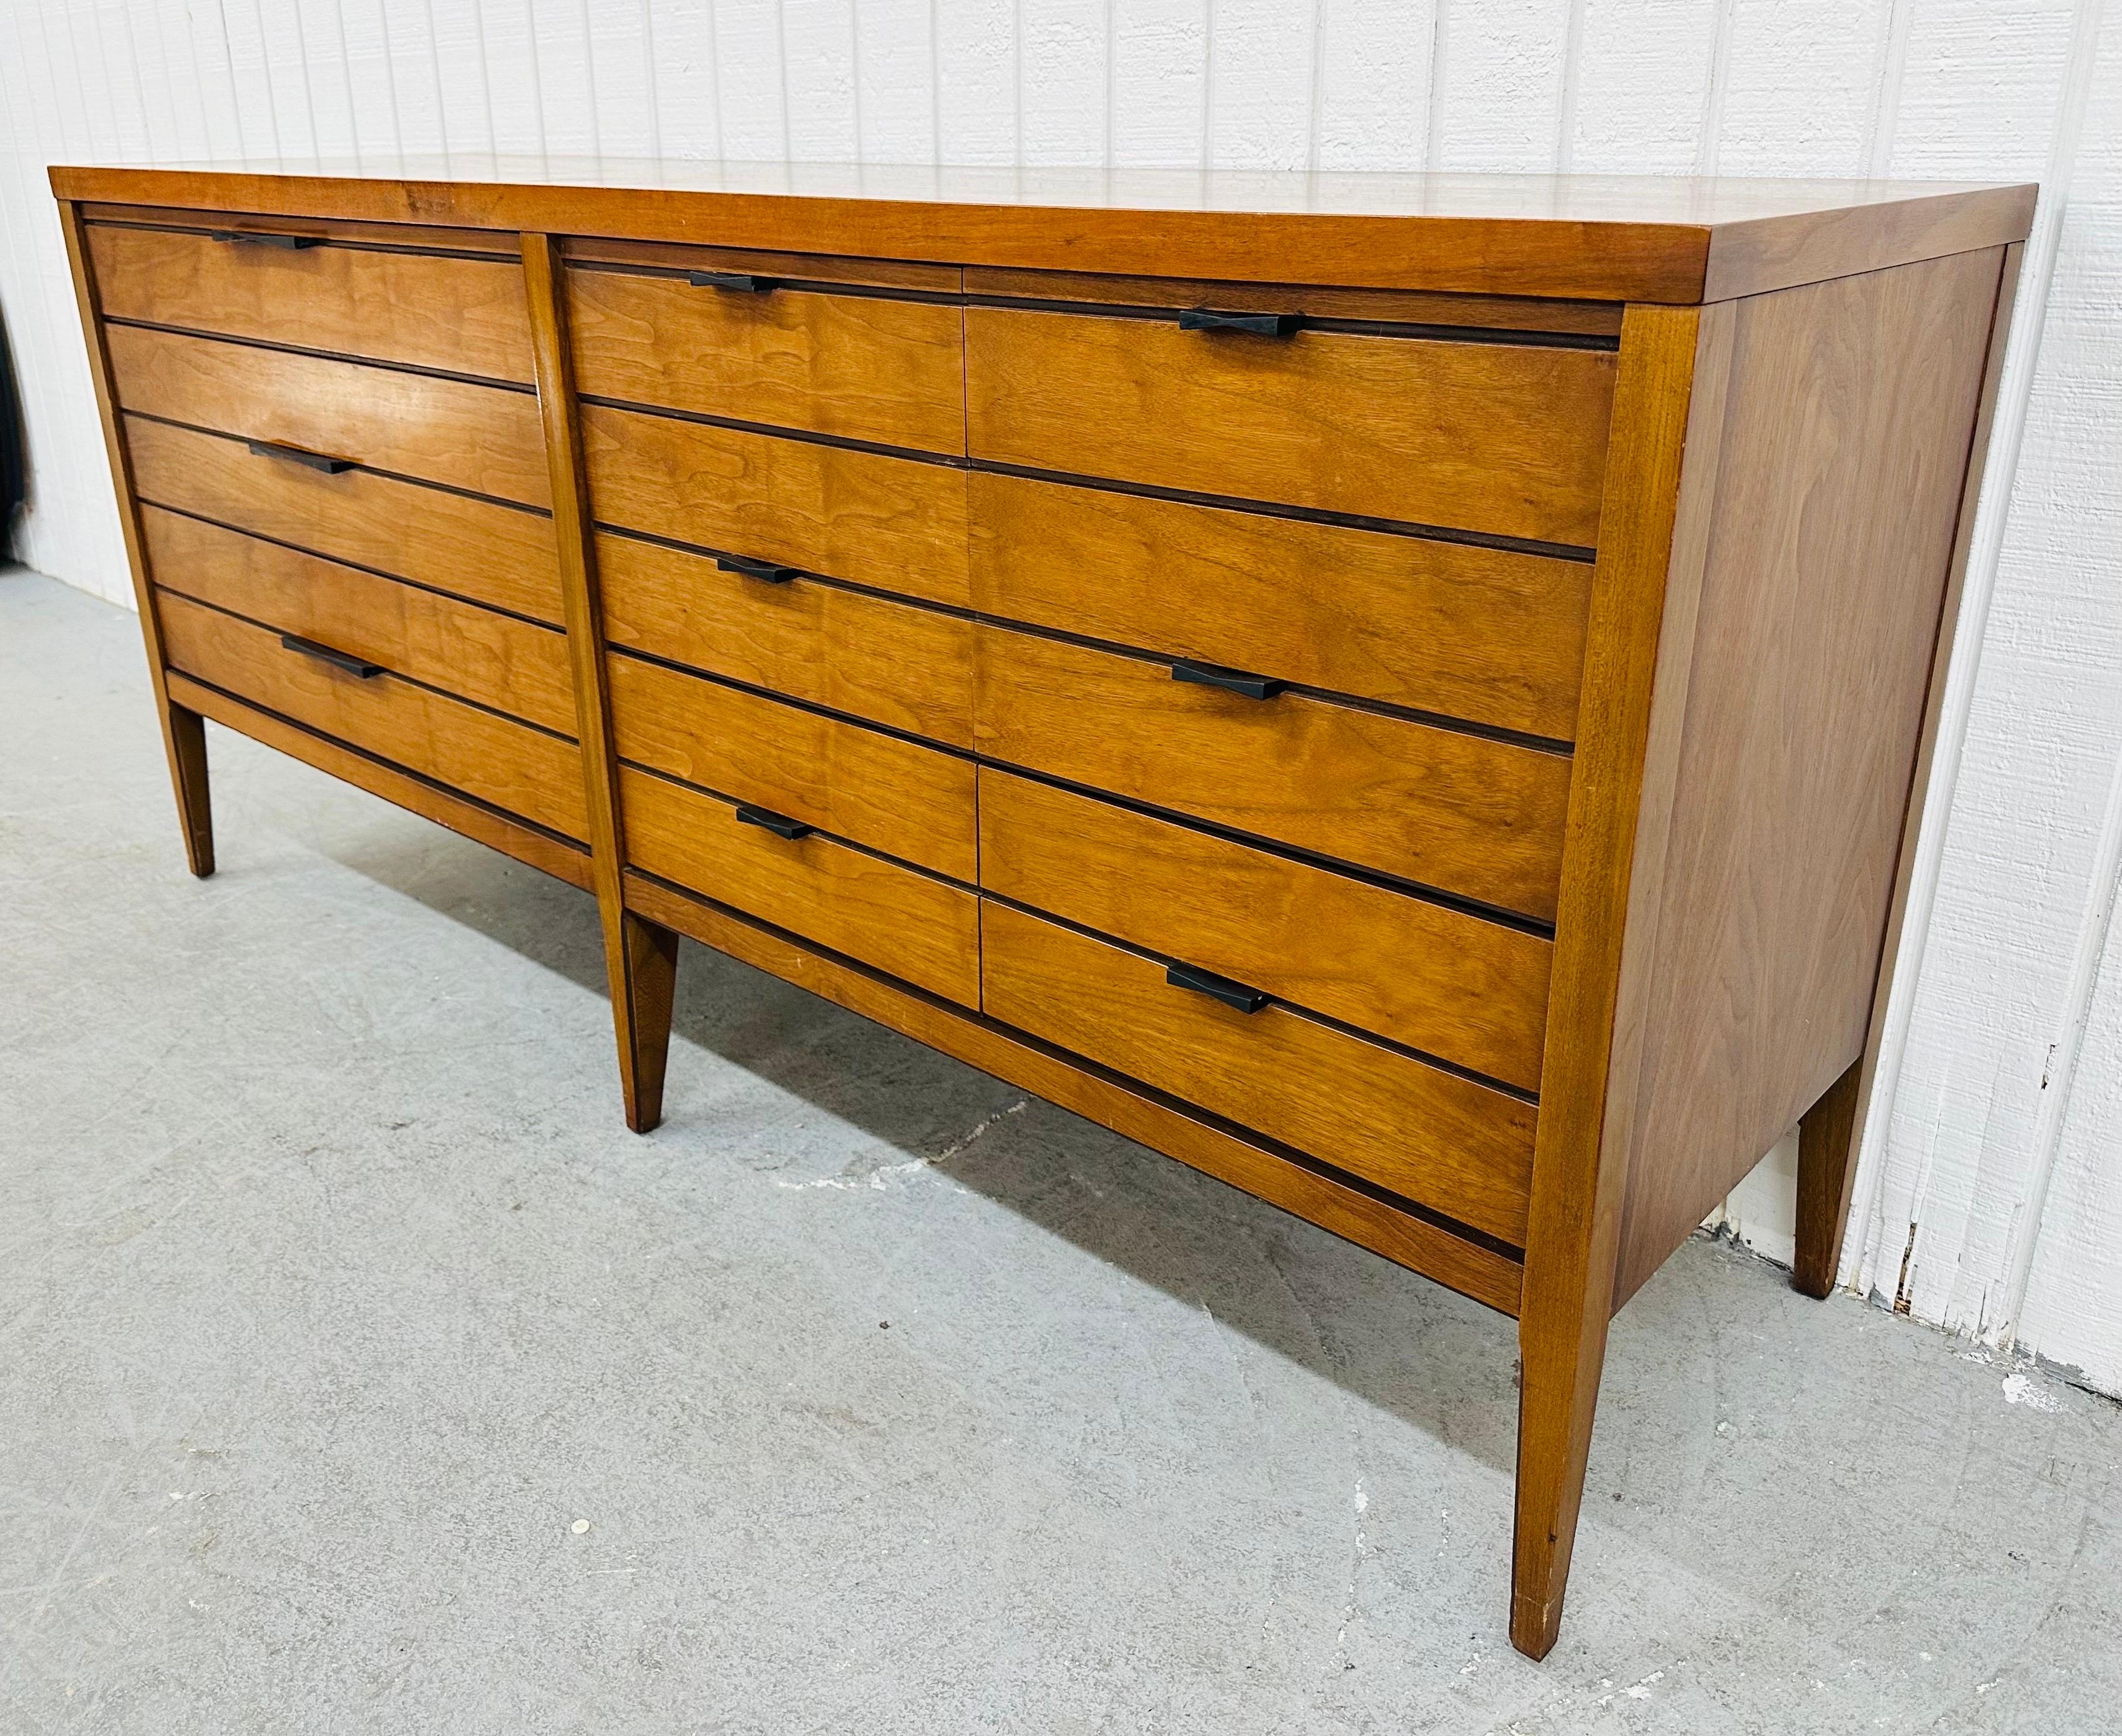 This listing is for a Mid-Century Modern Lane “Tuxedo” 9-Drawer Walnut Dresser. Featuring a straight line design, three large drawers on the left, six smaller drawers on the right, original black metal pulls, tuxedo inlaid top, and a beautiful